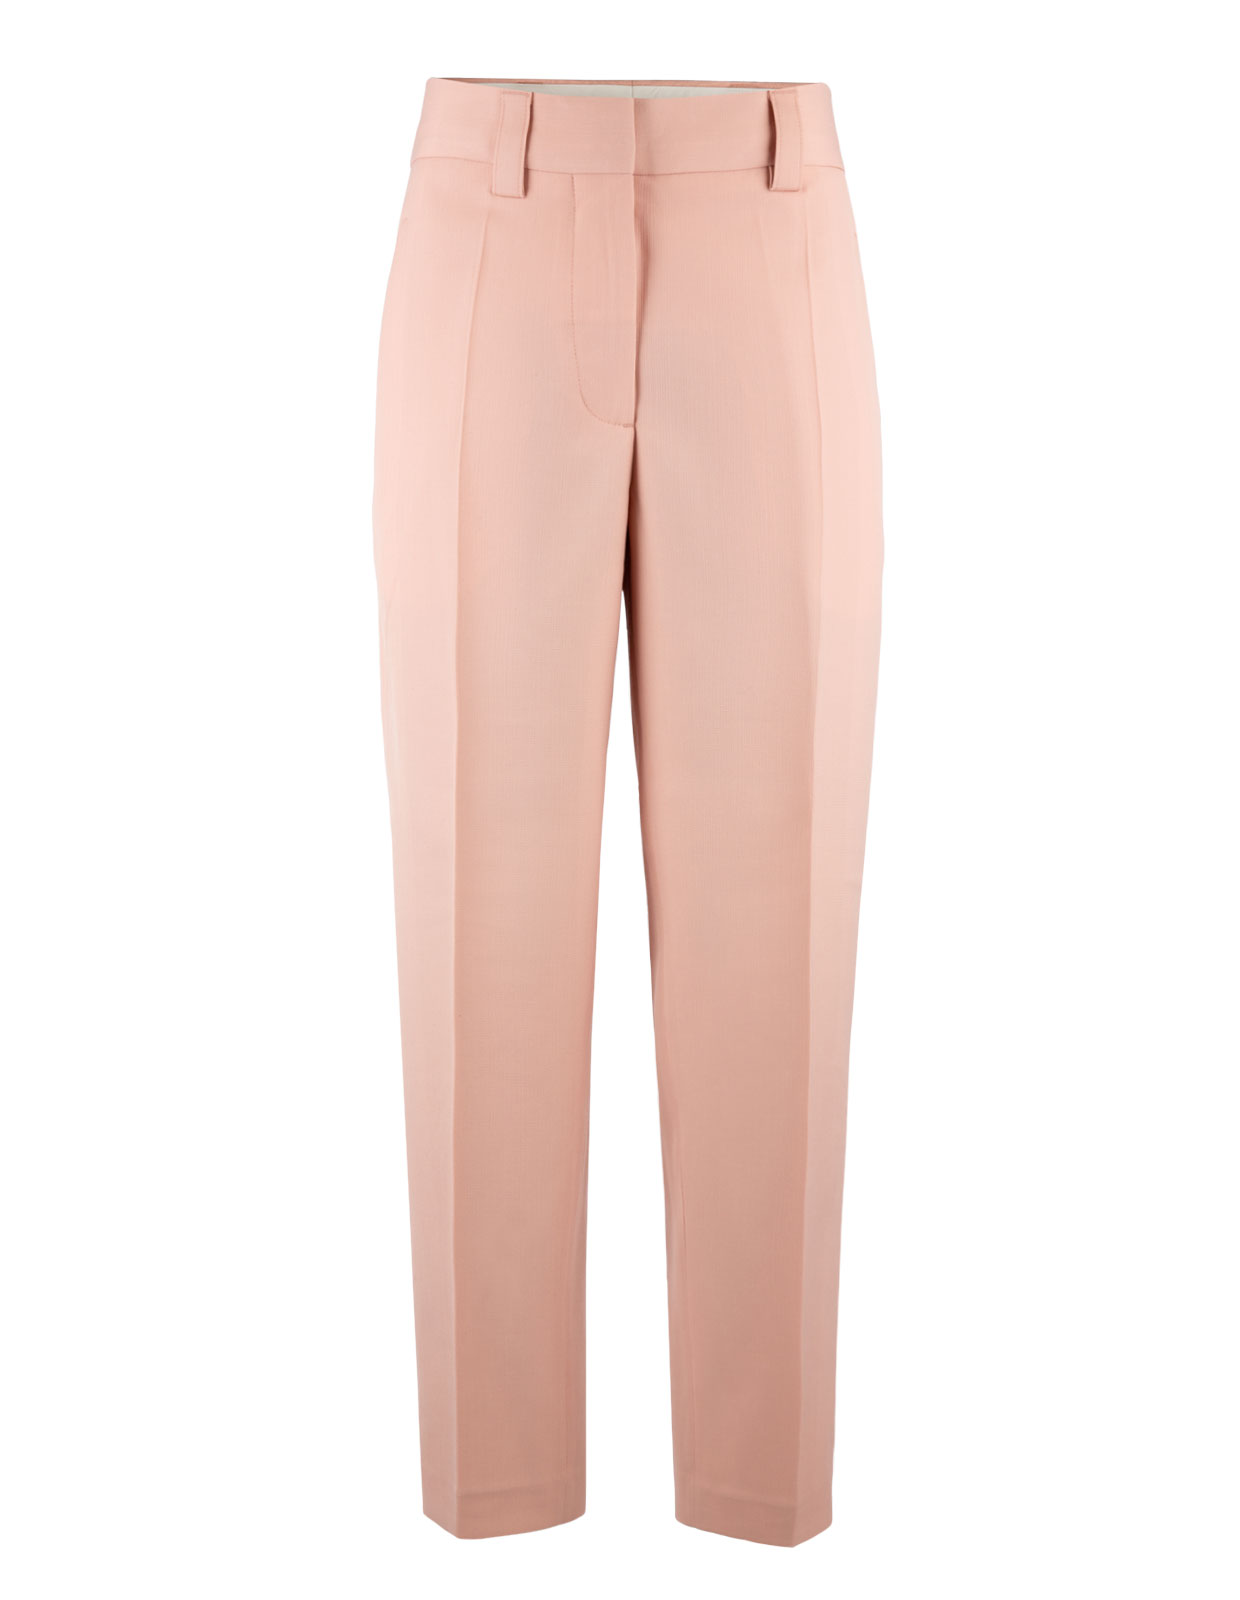 Acne Trousers Powder Pink